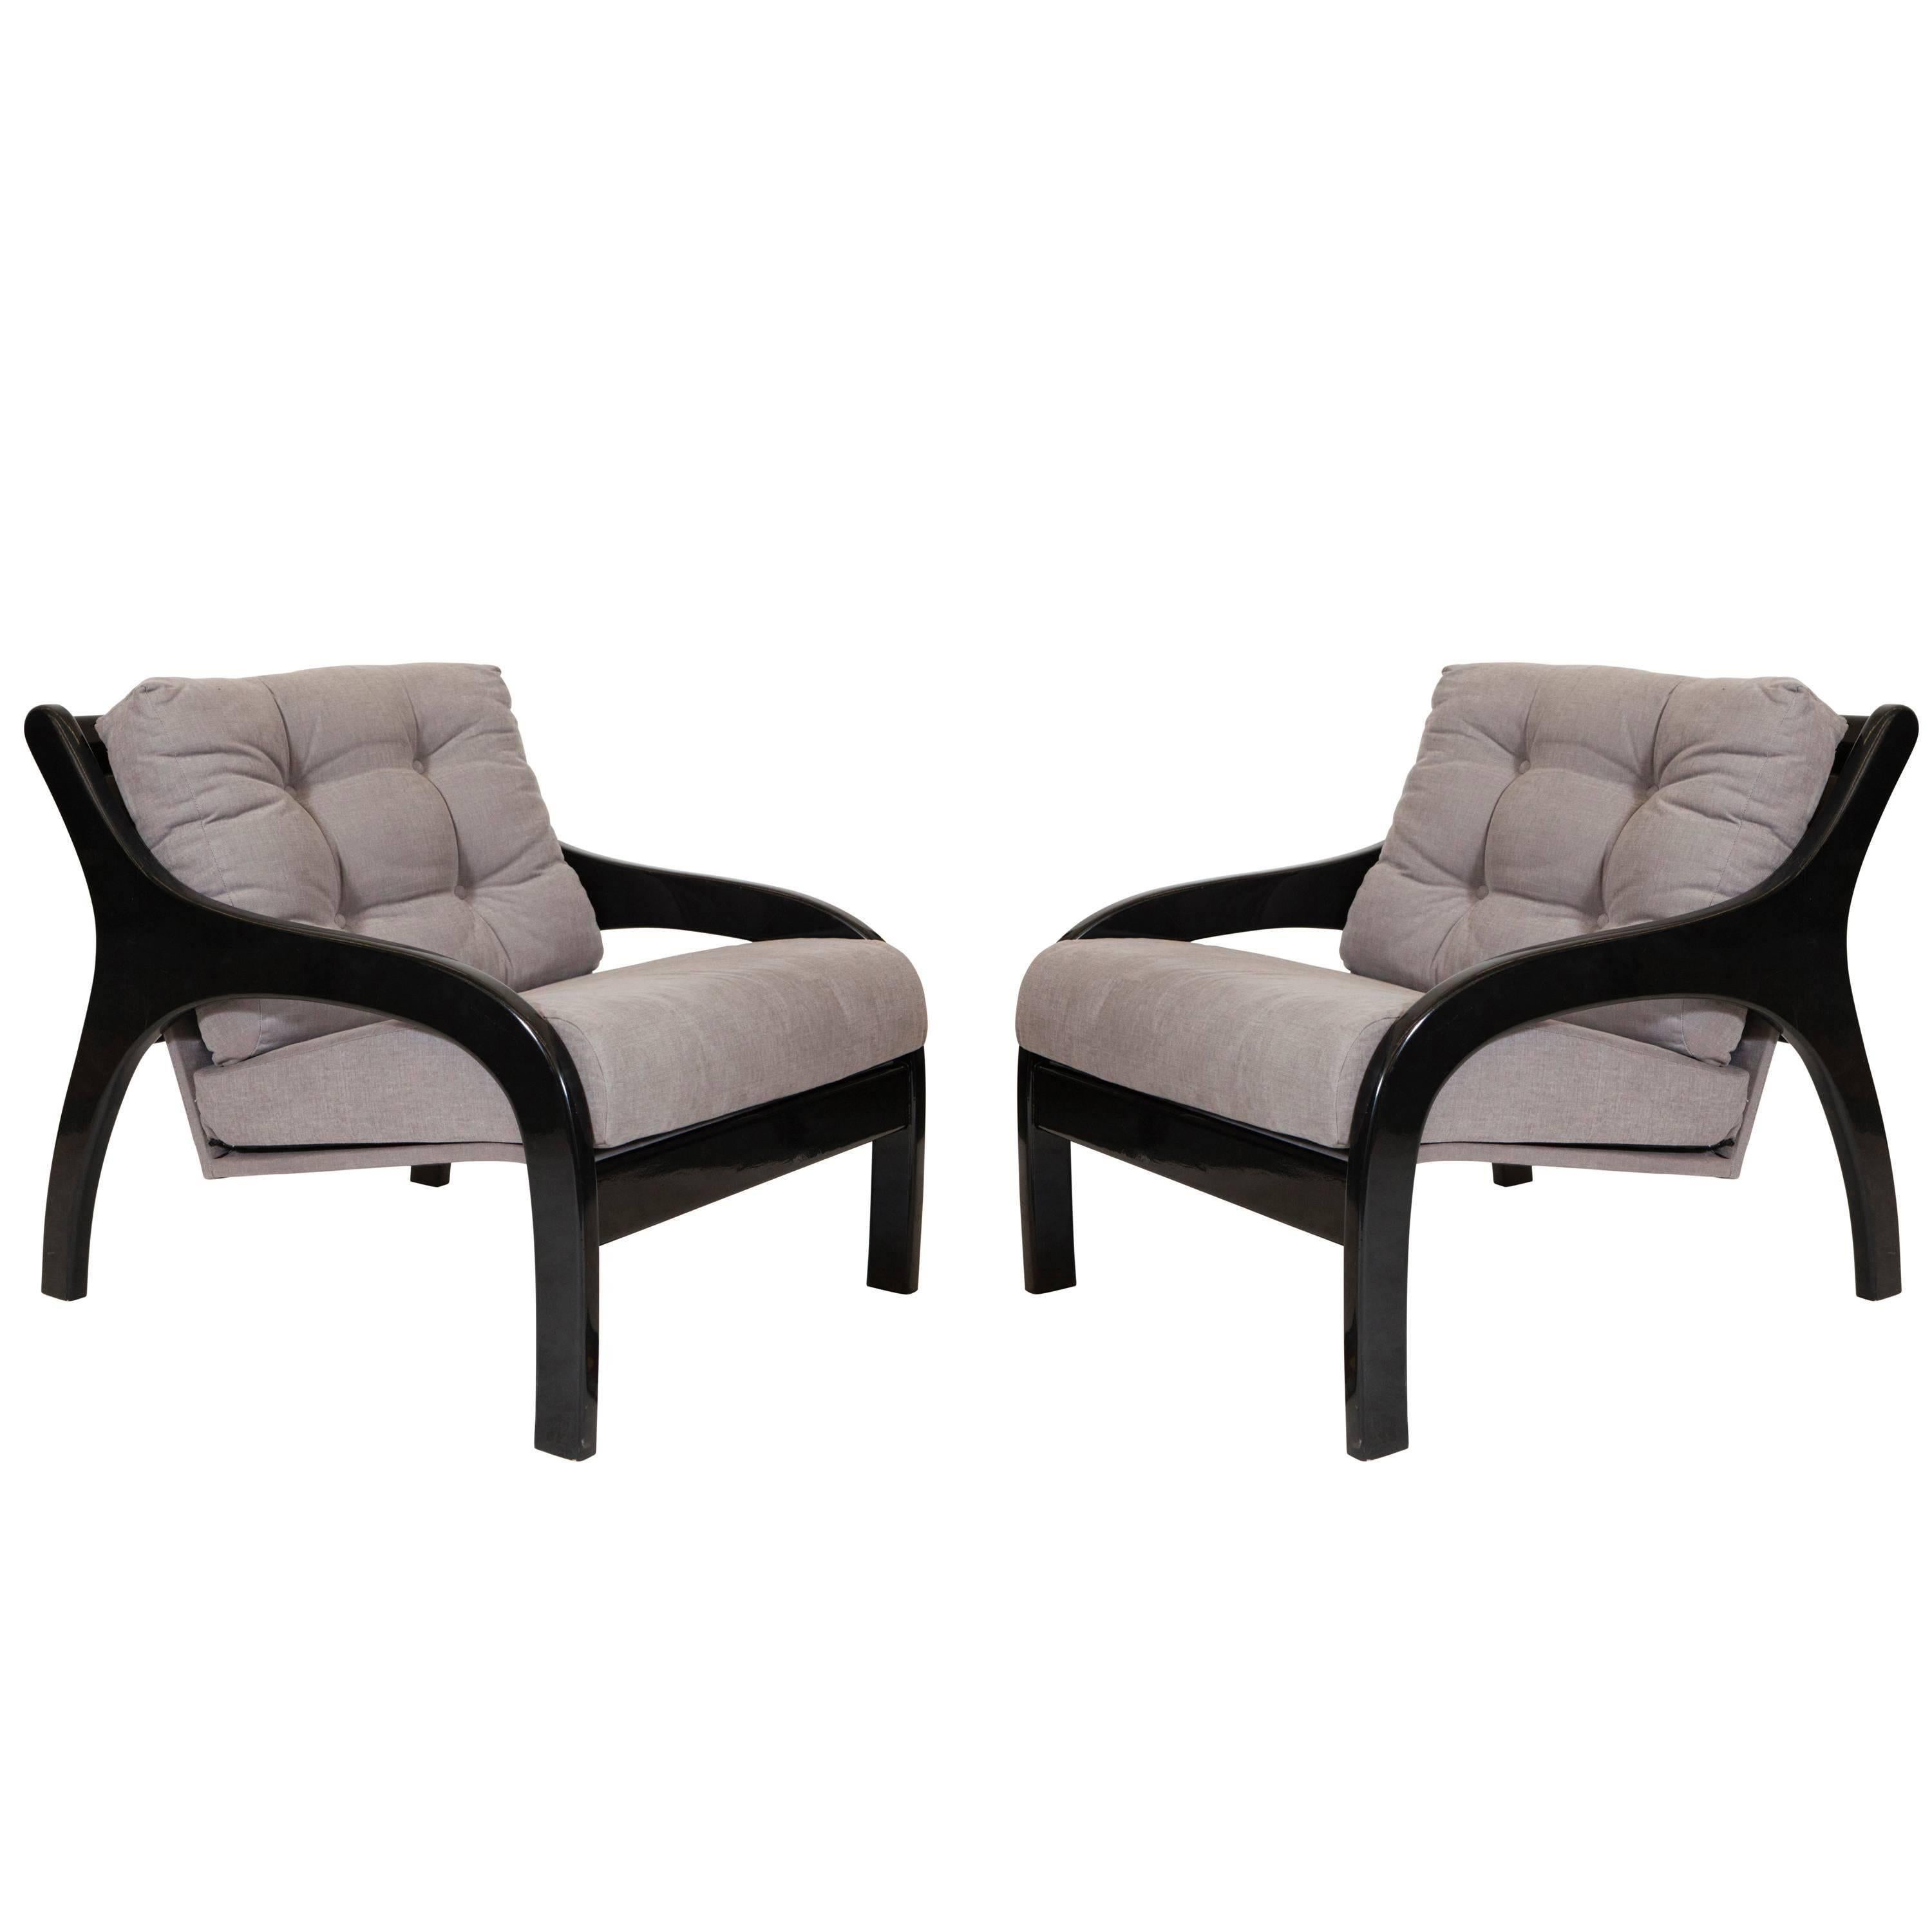 Black Fauteuils, Lacquer with Contemporary Grey Fabric For Sale